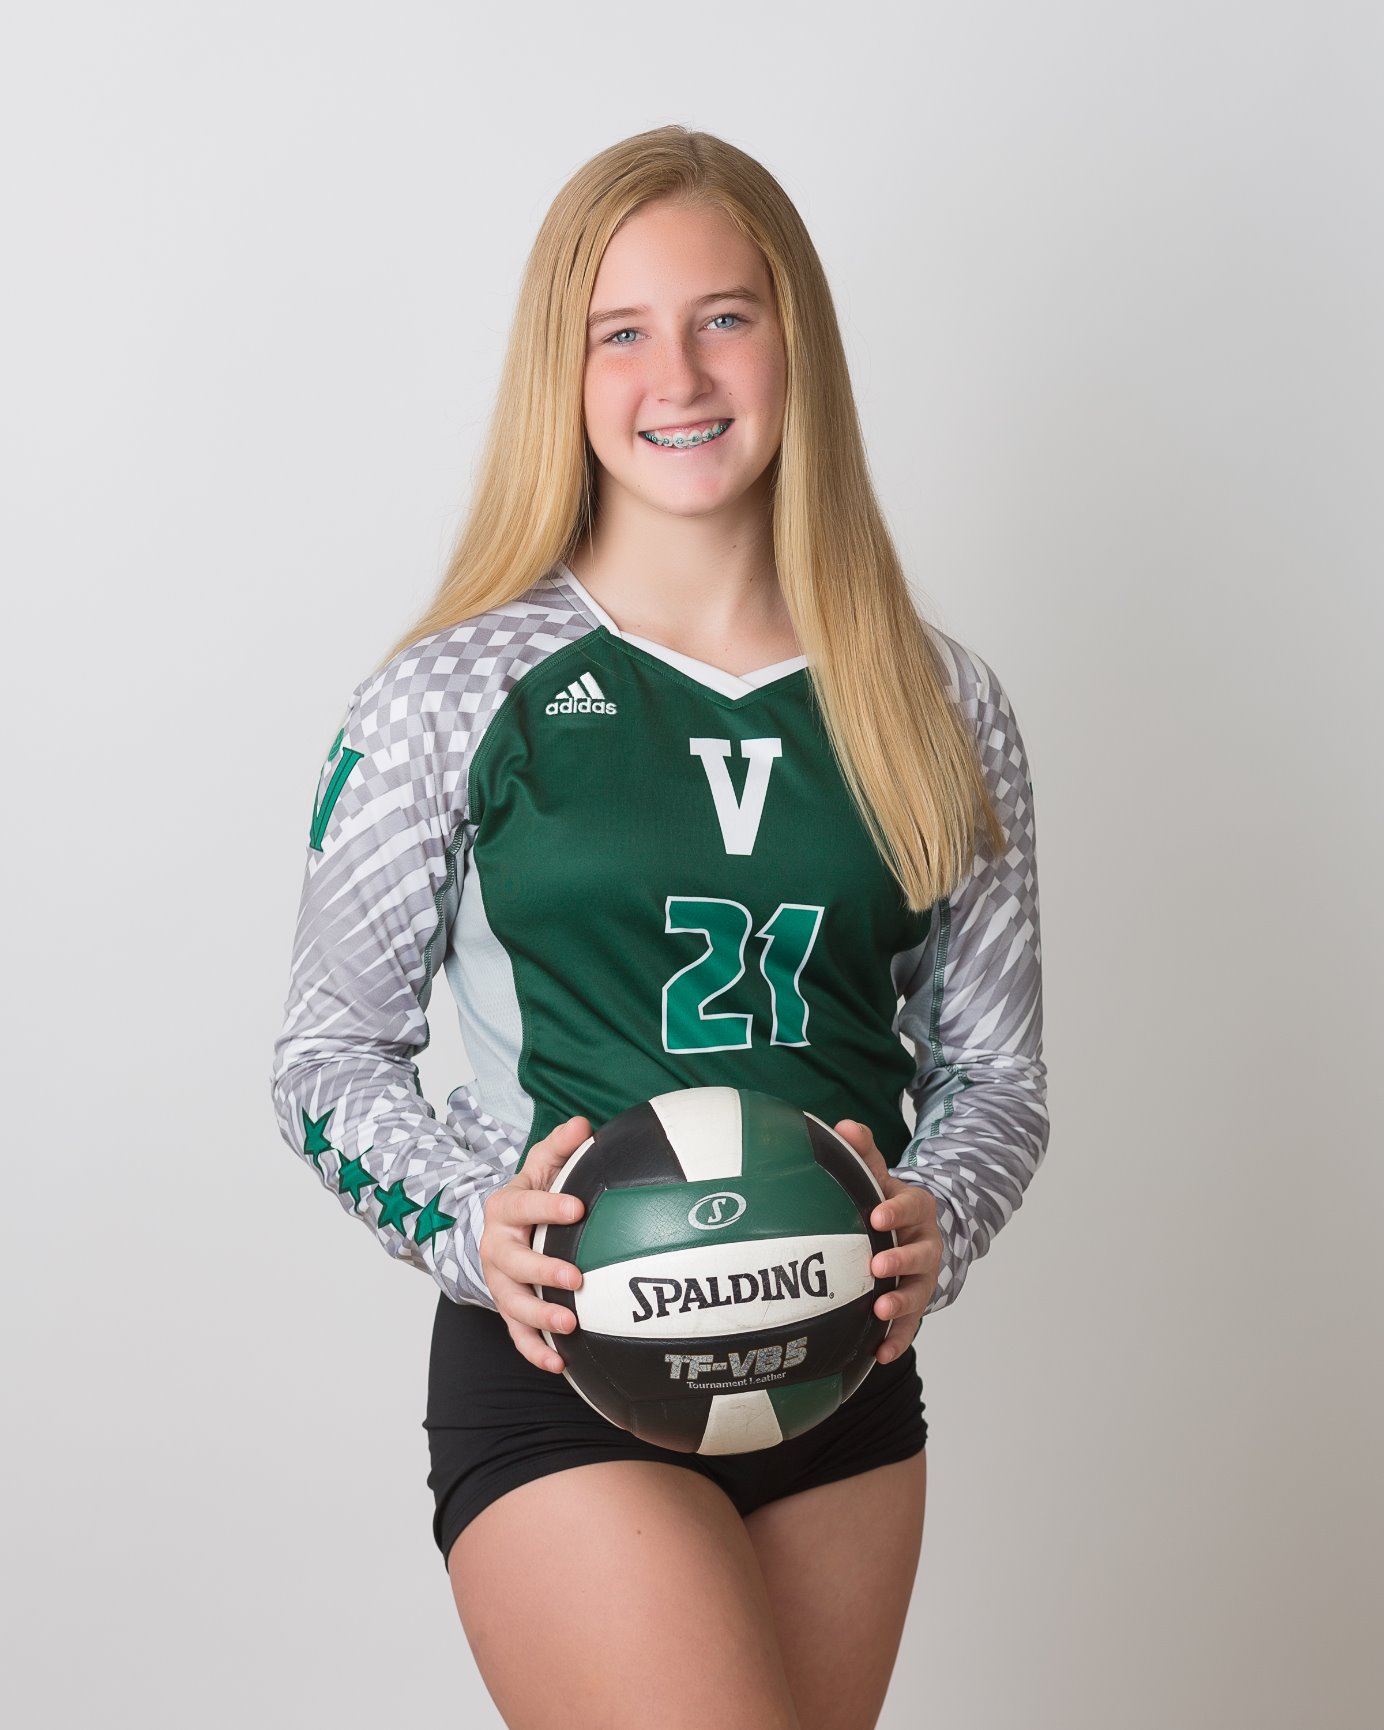 VHS Volleyball - Jenny Waring